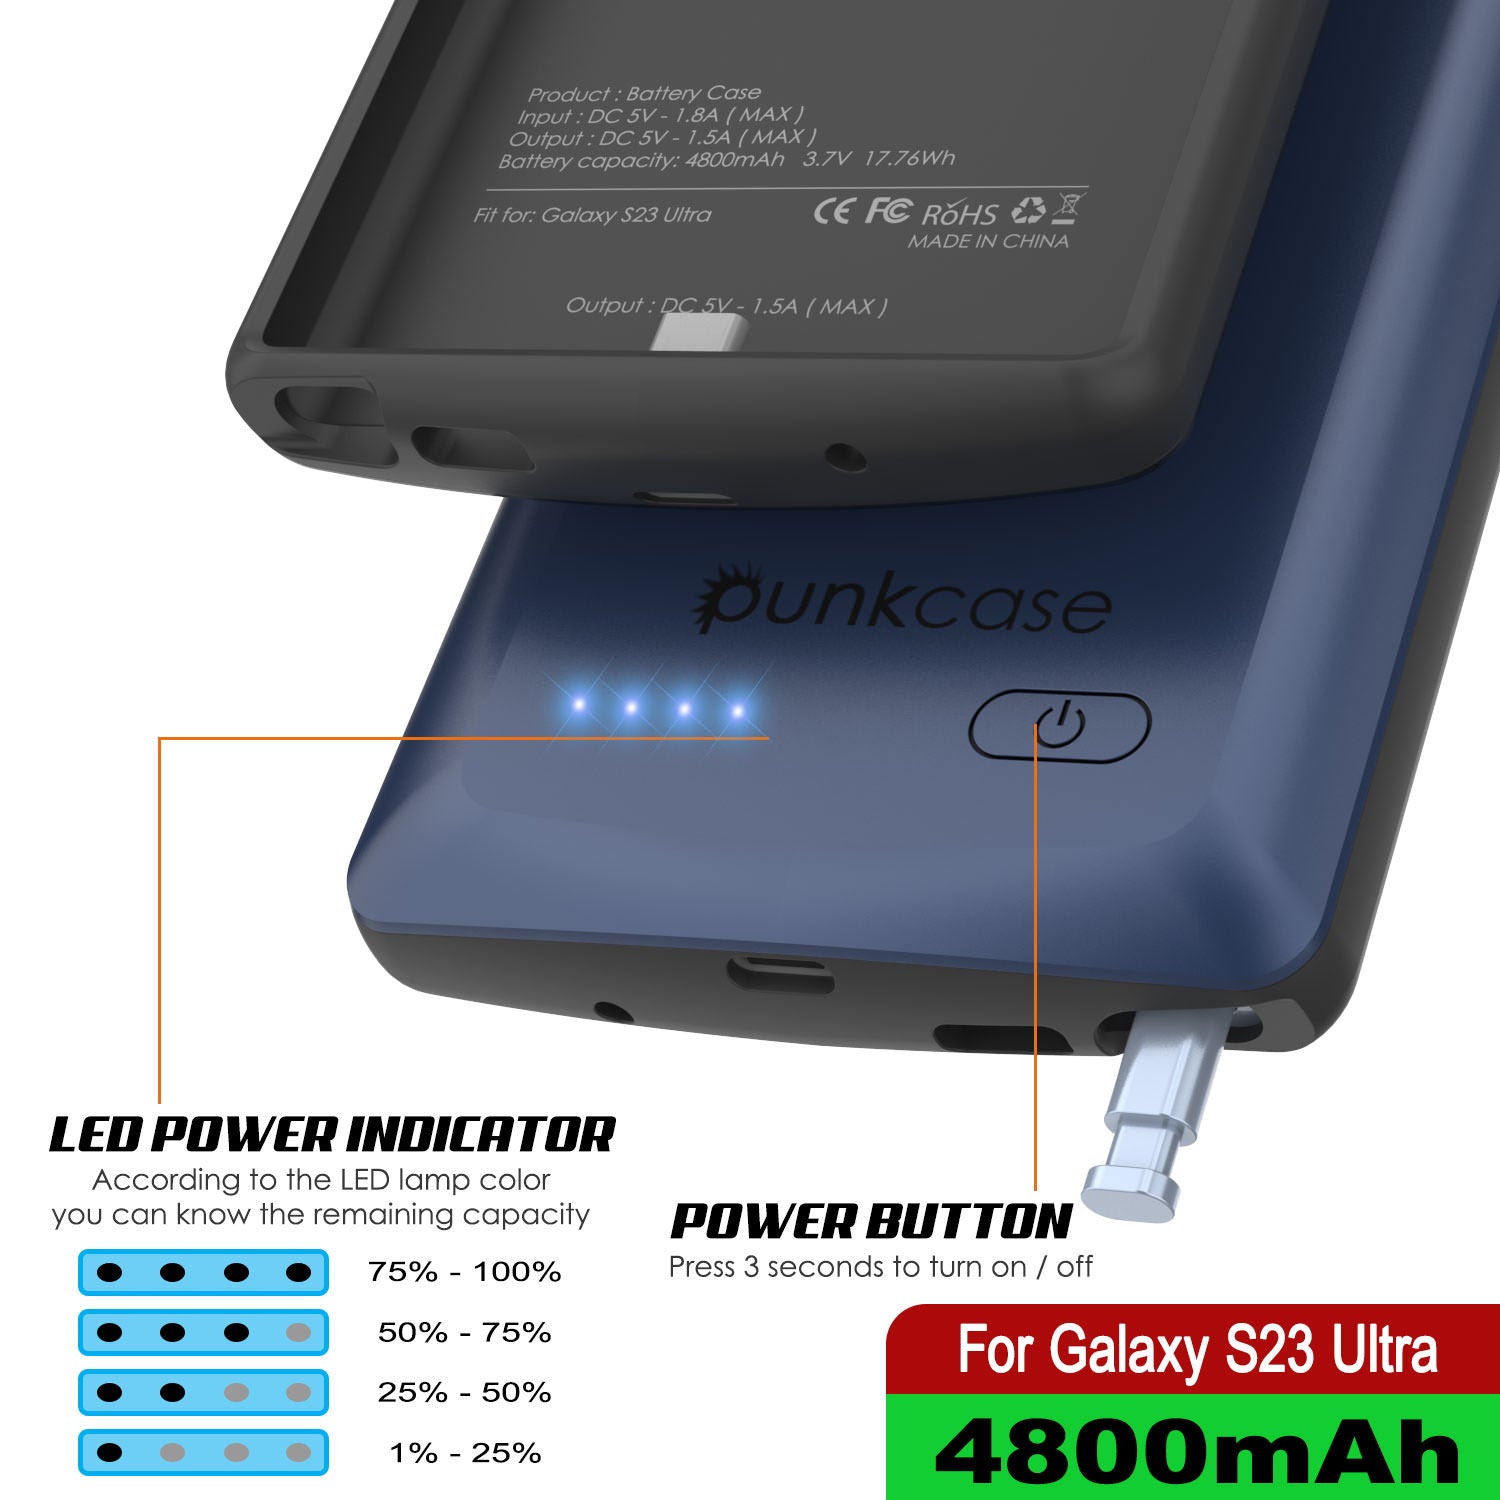 PunkJuice S24 Battery Case Blue - Portable Charging Power Juice Bank with 4500mAh